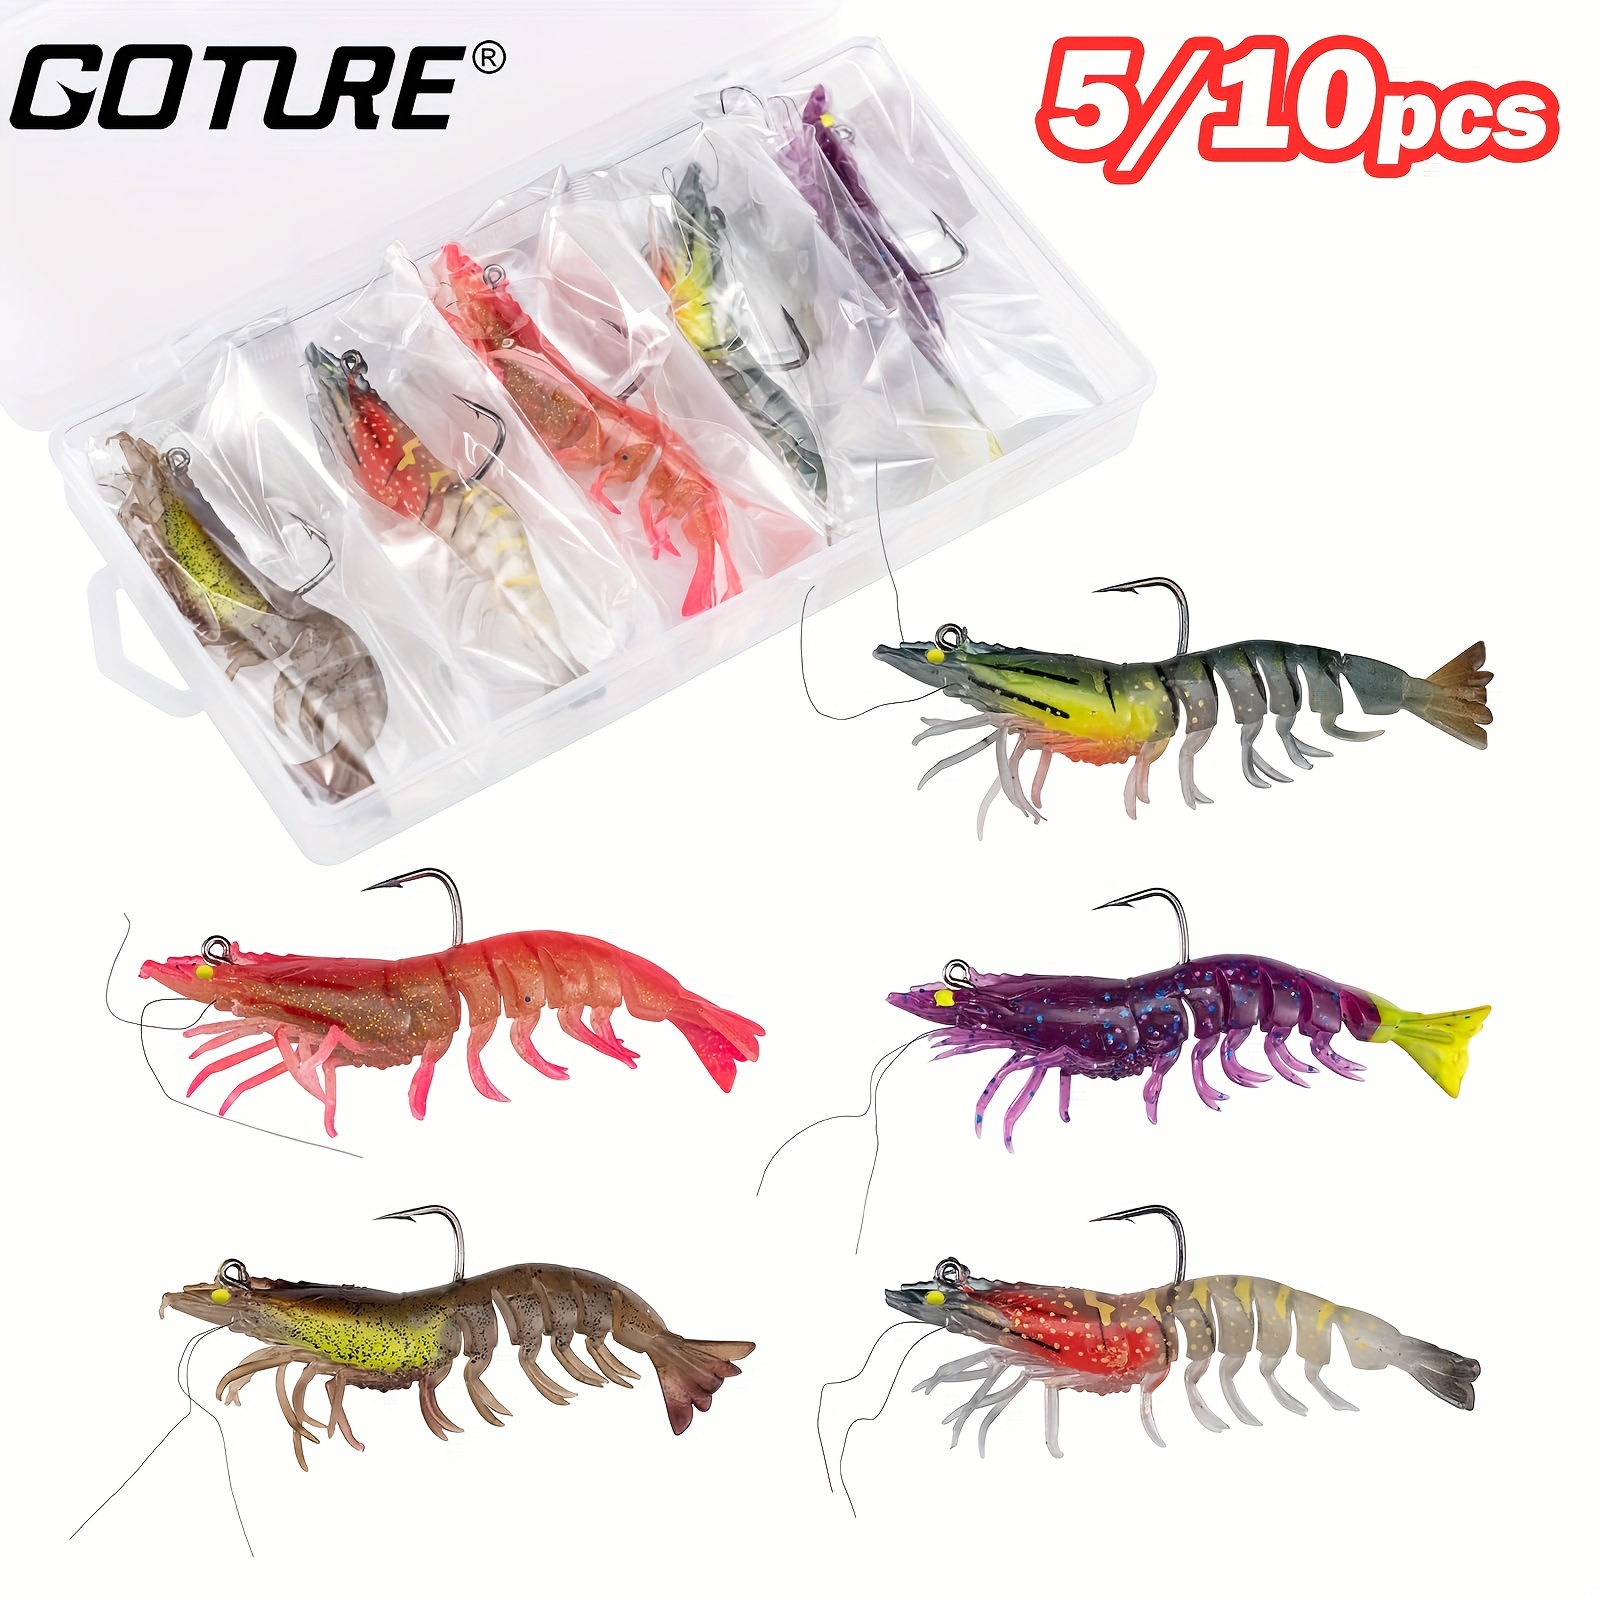 Shrimp Fishing Lures,20pcs Soft Shrimp Lure Baits Soft Lure Worms Glow  Simulation Prawn Shrimps Fishing Tackle Lures baits for Bass Walleye Trout  